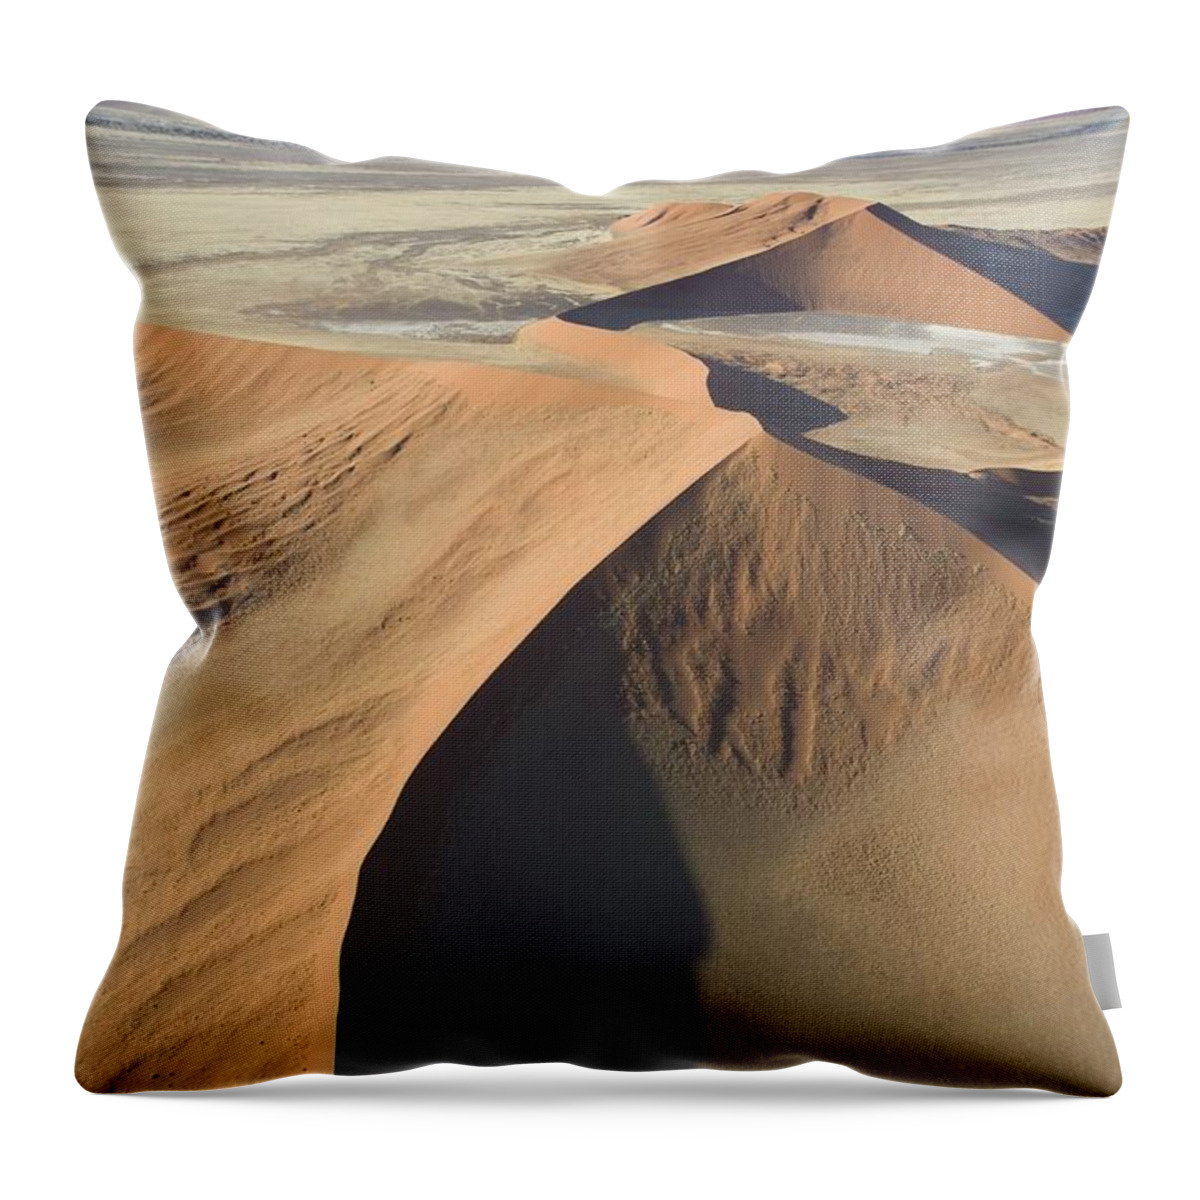 Desert; Landscape; Bird's Eye View; Remote; Wilderness; African; Arid; Dry; Empty; Hot; Dunes; Epic; Distance; Sand Dunes; Formation; Geological; Formations; Natural Phenomenon; Scenic; Plain; Plains; Mountains Throw Pillow featuring the painting Namib Desert by Unknown